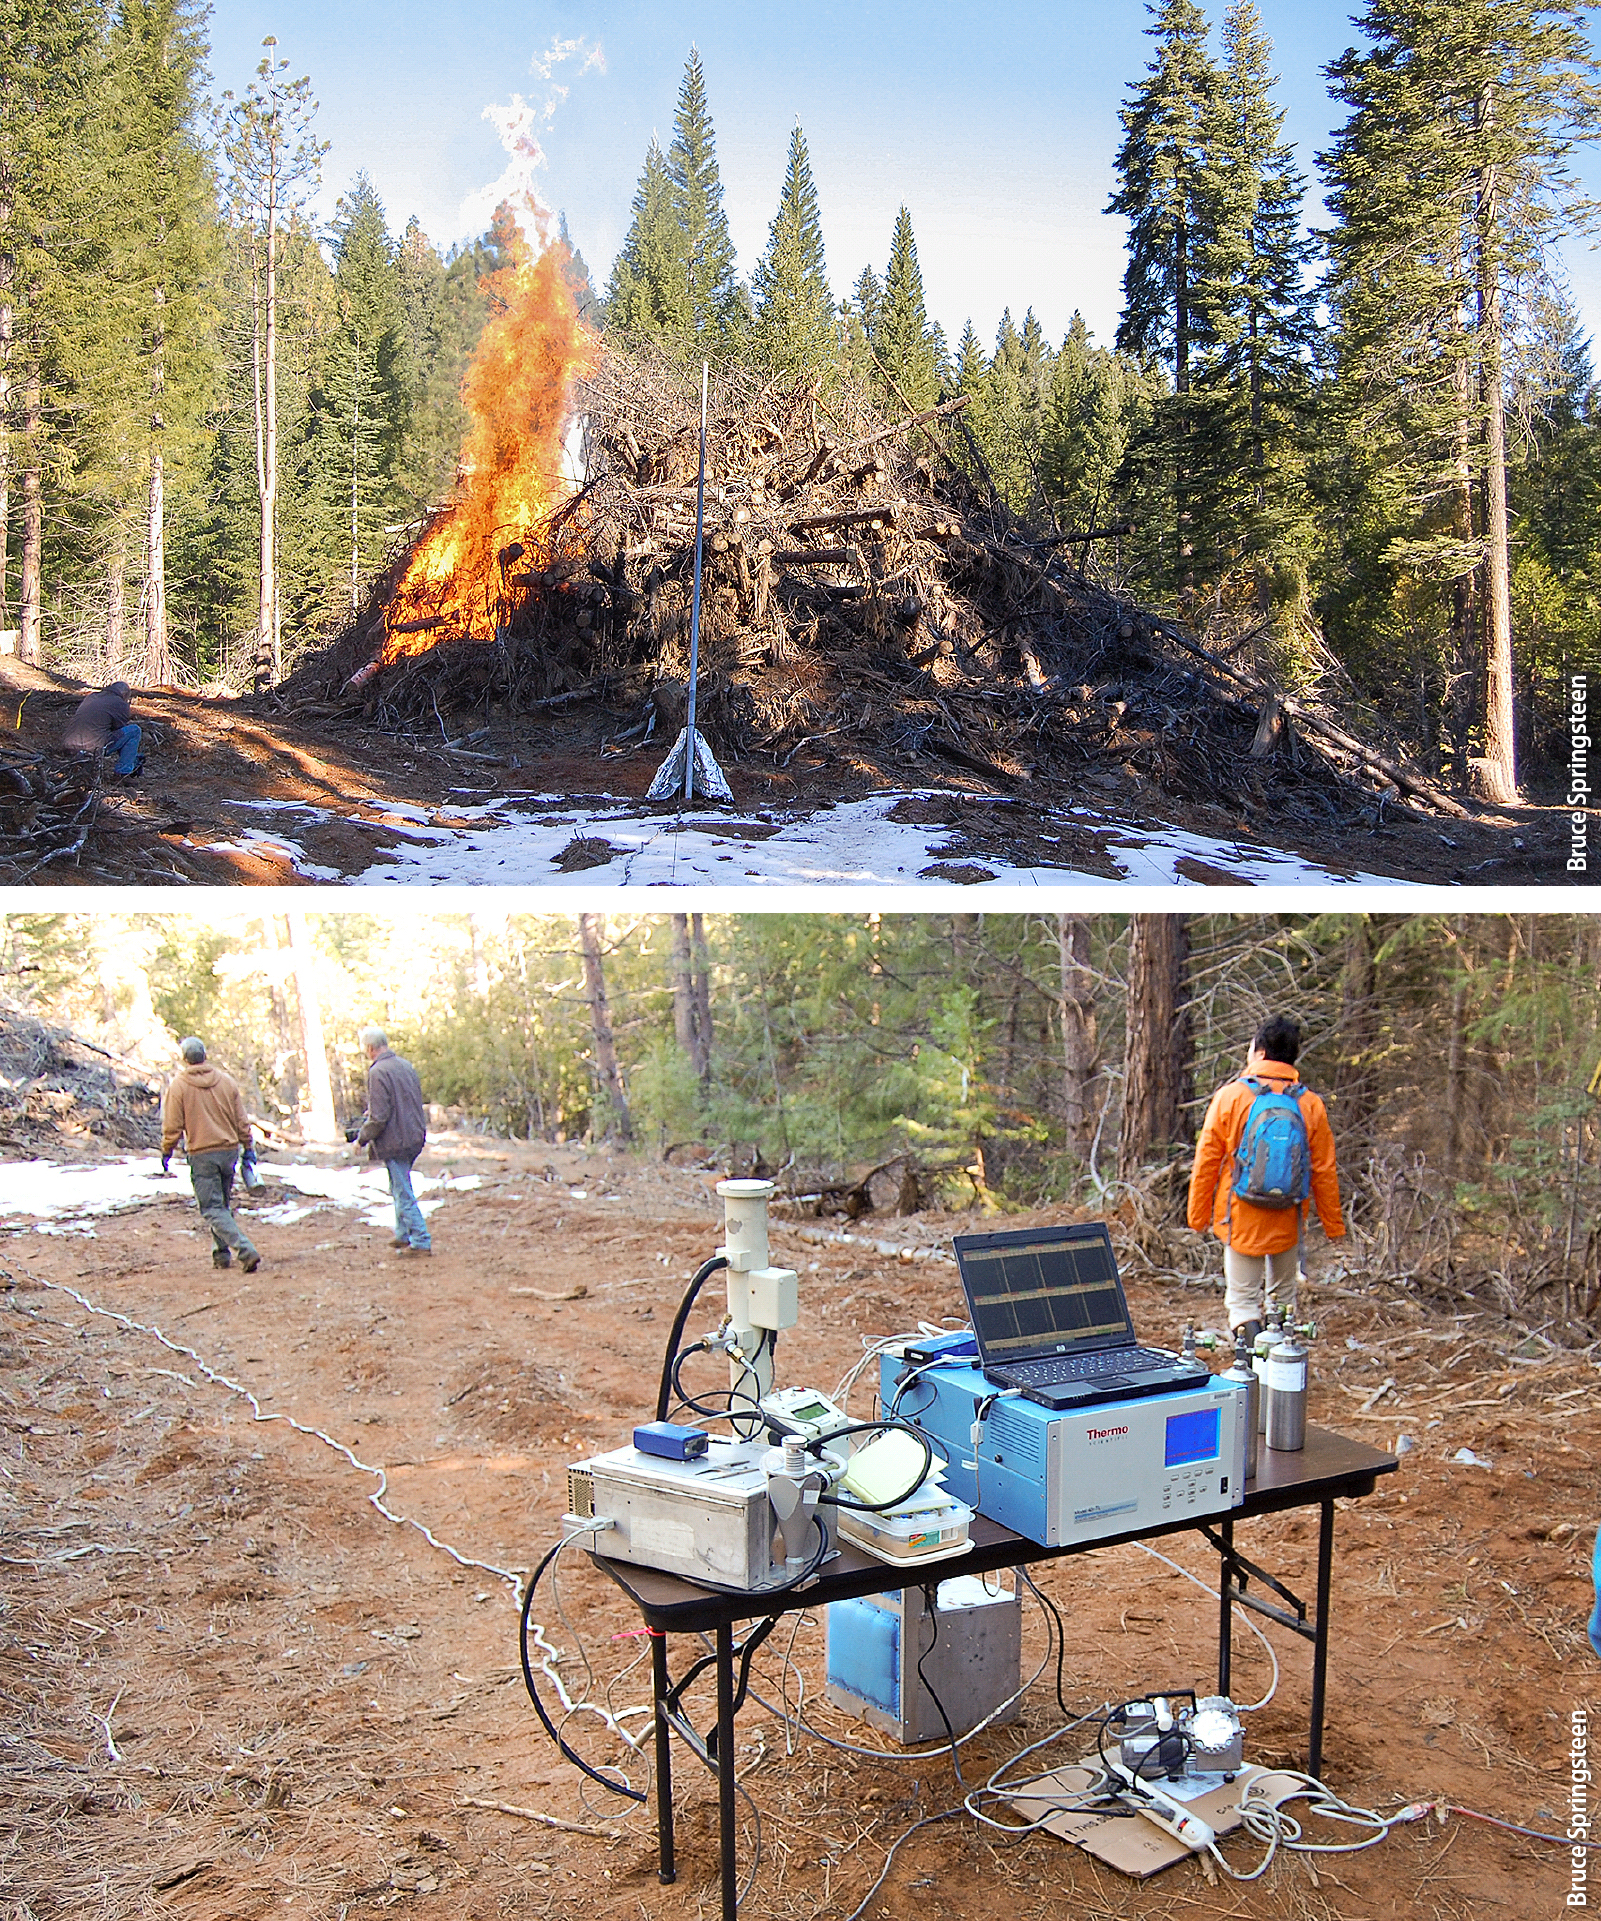 To sample air emissions from the pile burn, researchers used a 20-foot steel probe at the edge of the pile (top); nitrogen oxides, black carbon and carbon dioxide were measured on site using continuous emissions monitors. Canister samples were collected and sent for off site analysis for total fine particulate matter, trace hydrocarbons and carbon monoxide.